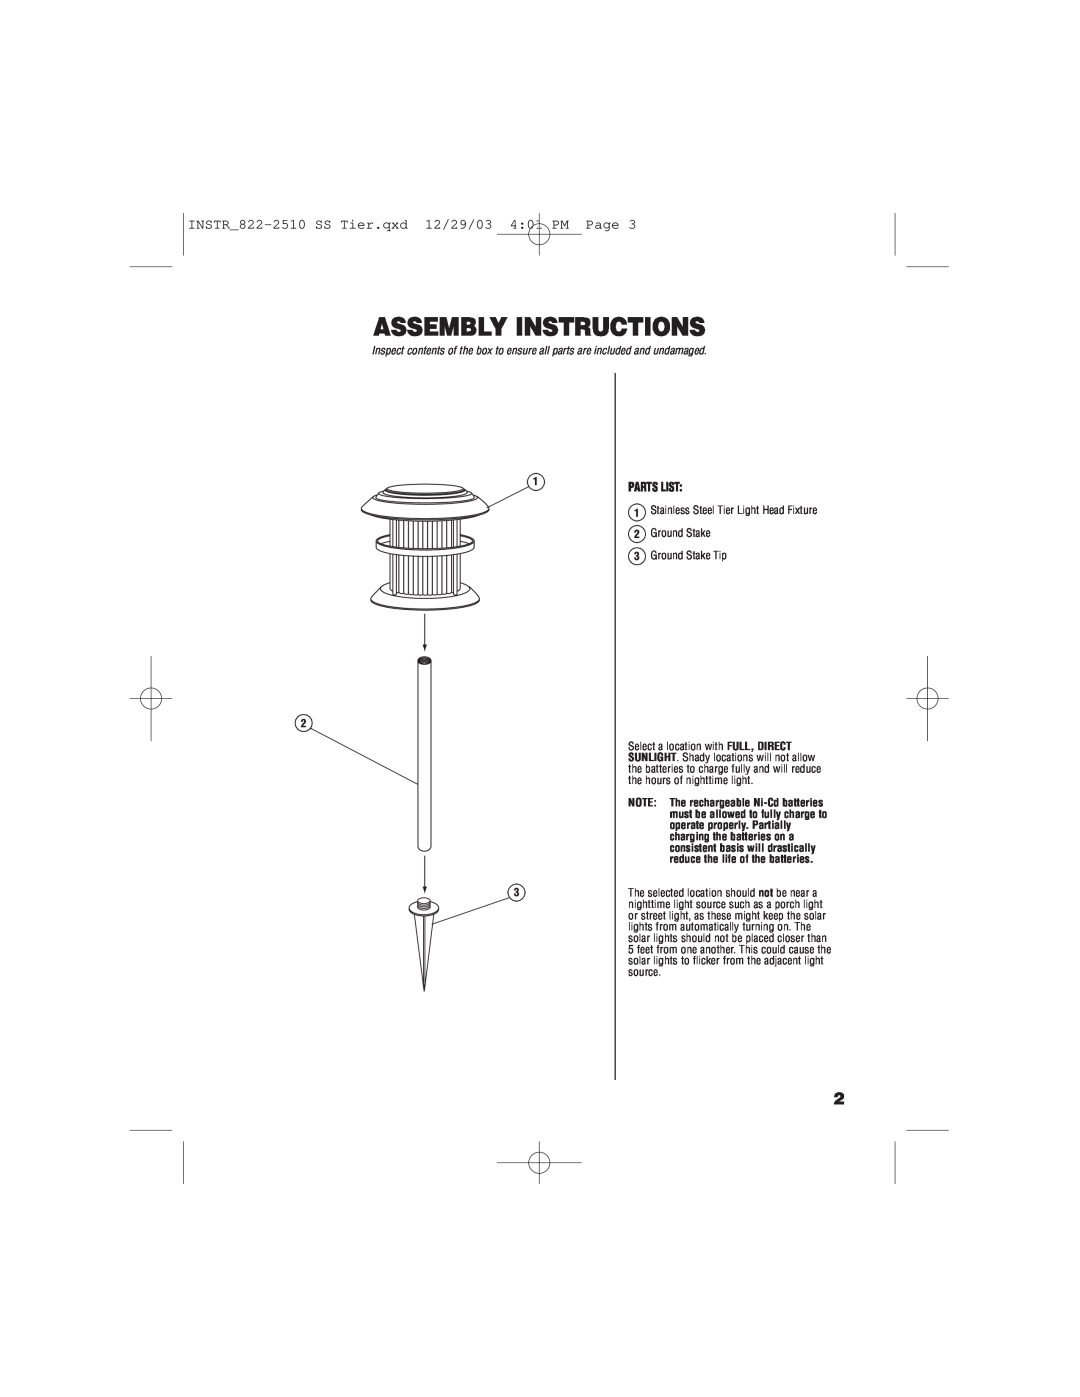 Brinkmann Stainless Steel Tier Assembly Instructions, Parts List, INSTR822-2510 SS Tier.qxd 12/29/03 401 PM Page 